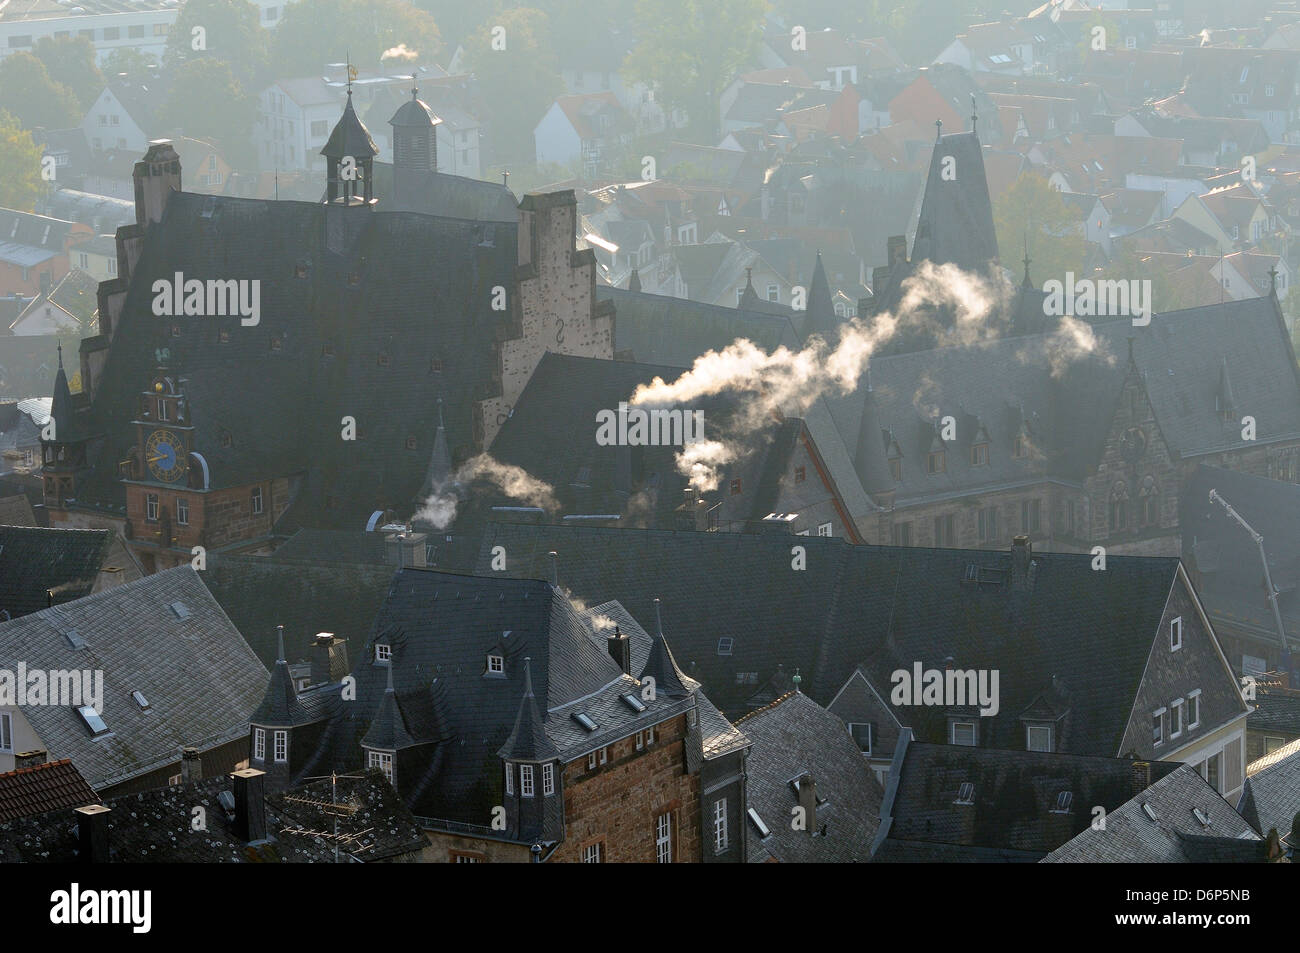 Rooftops of medieval buildings in Marburg, including Town Hall and Old University, Marburg, Hesse, Germany Stock Photo